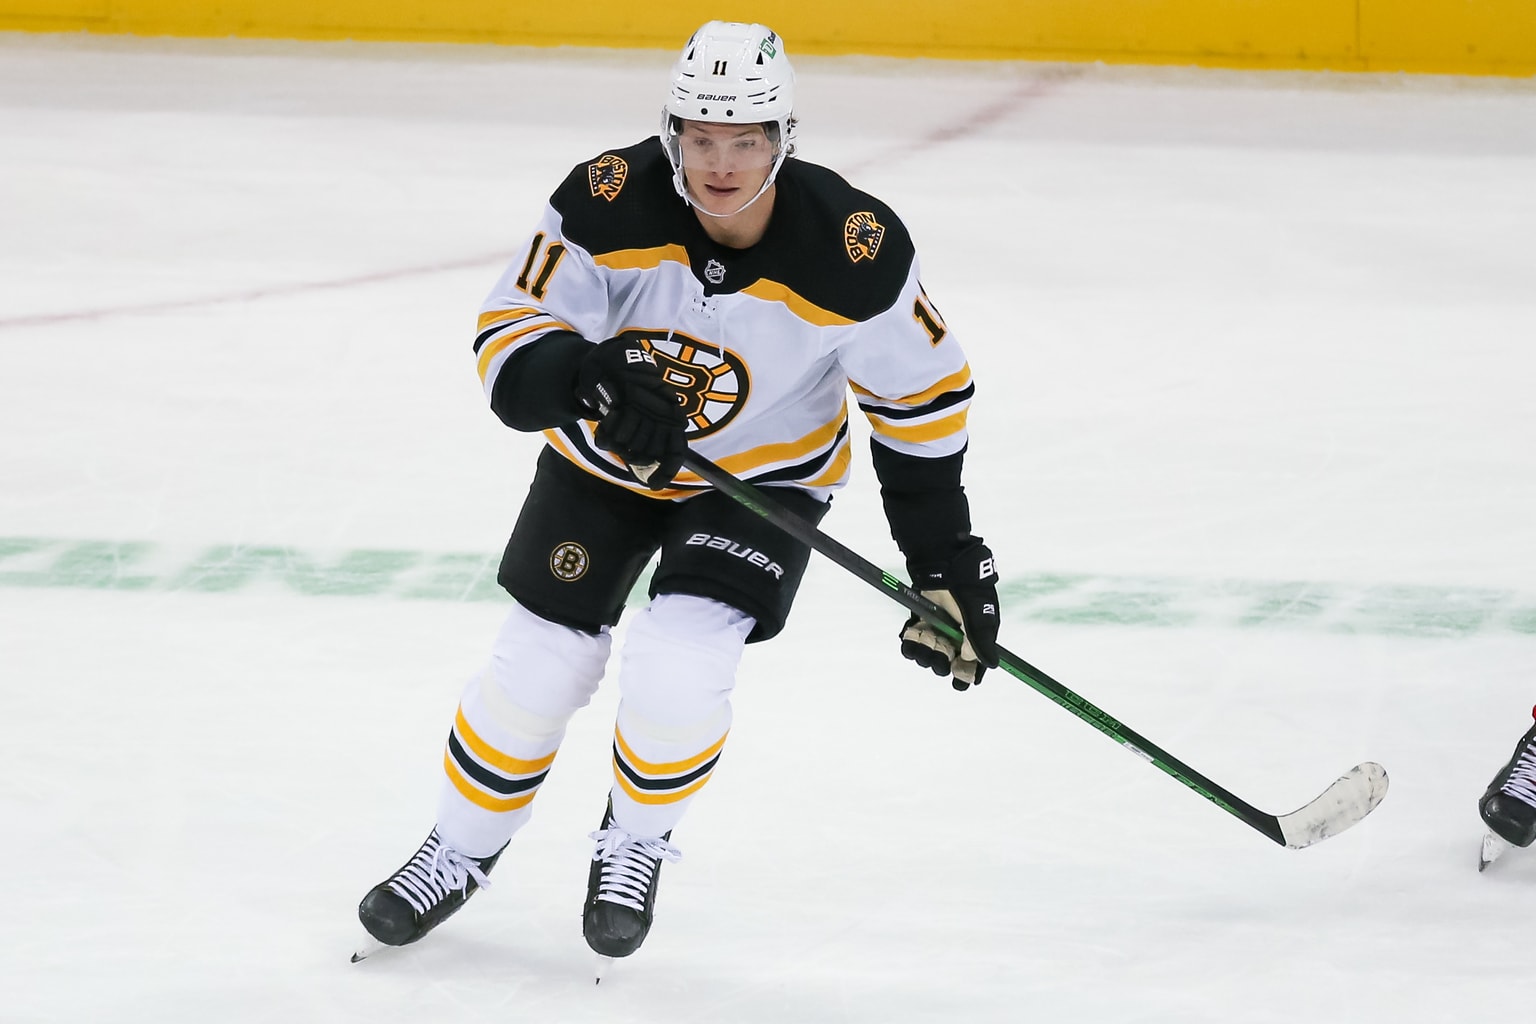 BRUINS NOTEBOOK: Forward Trent Frederic makes unique NHL